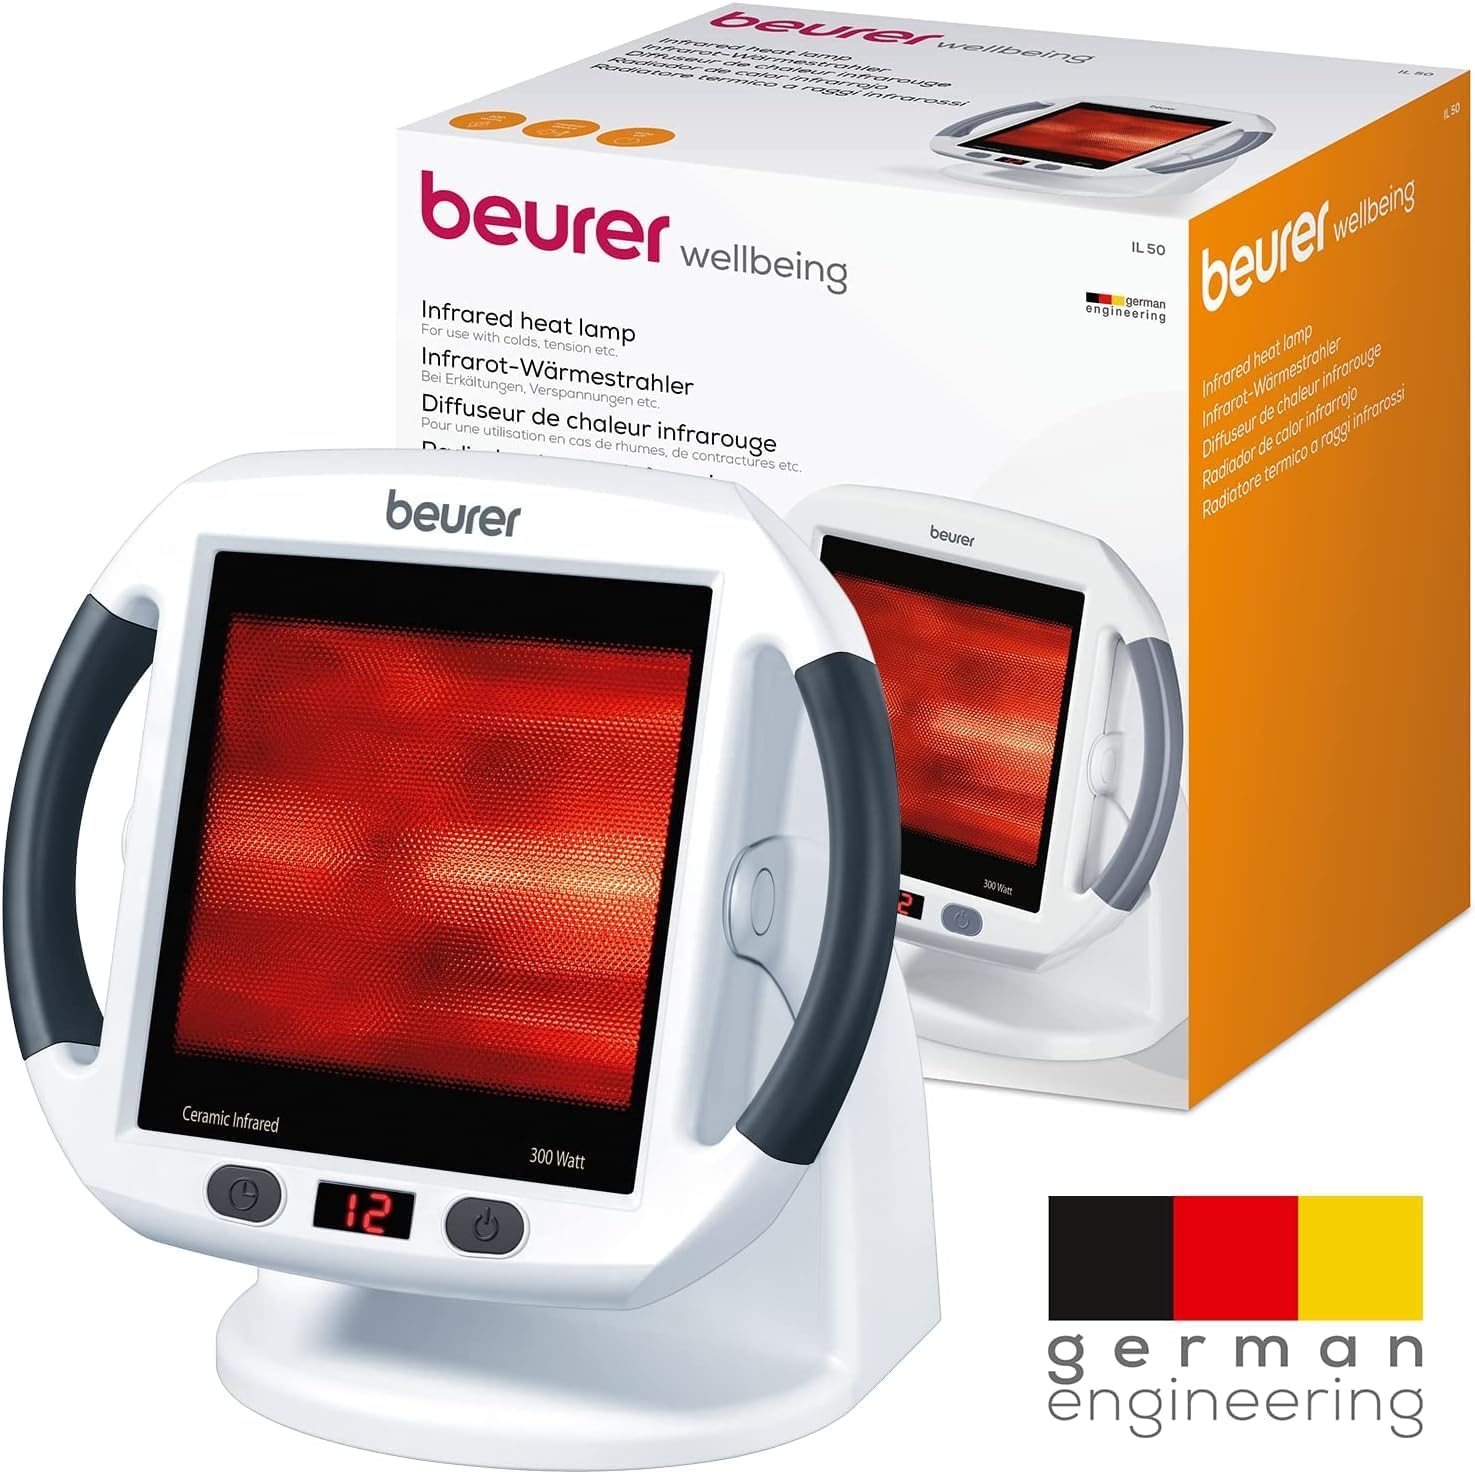 Beurer IL50 Infrared Heated Red Light Therapy Lamp for Body, Face, Sinuses, & Skin - $60